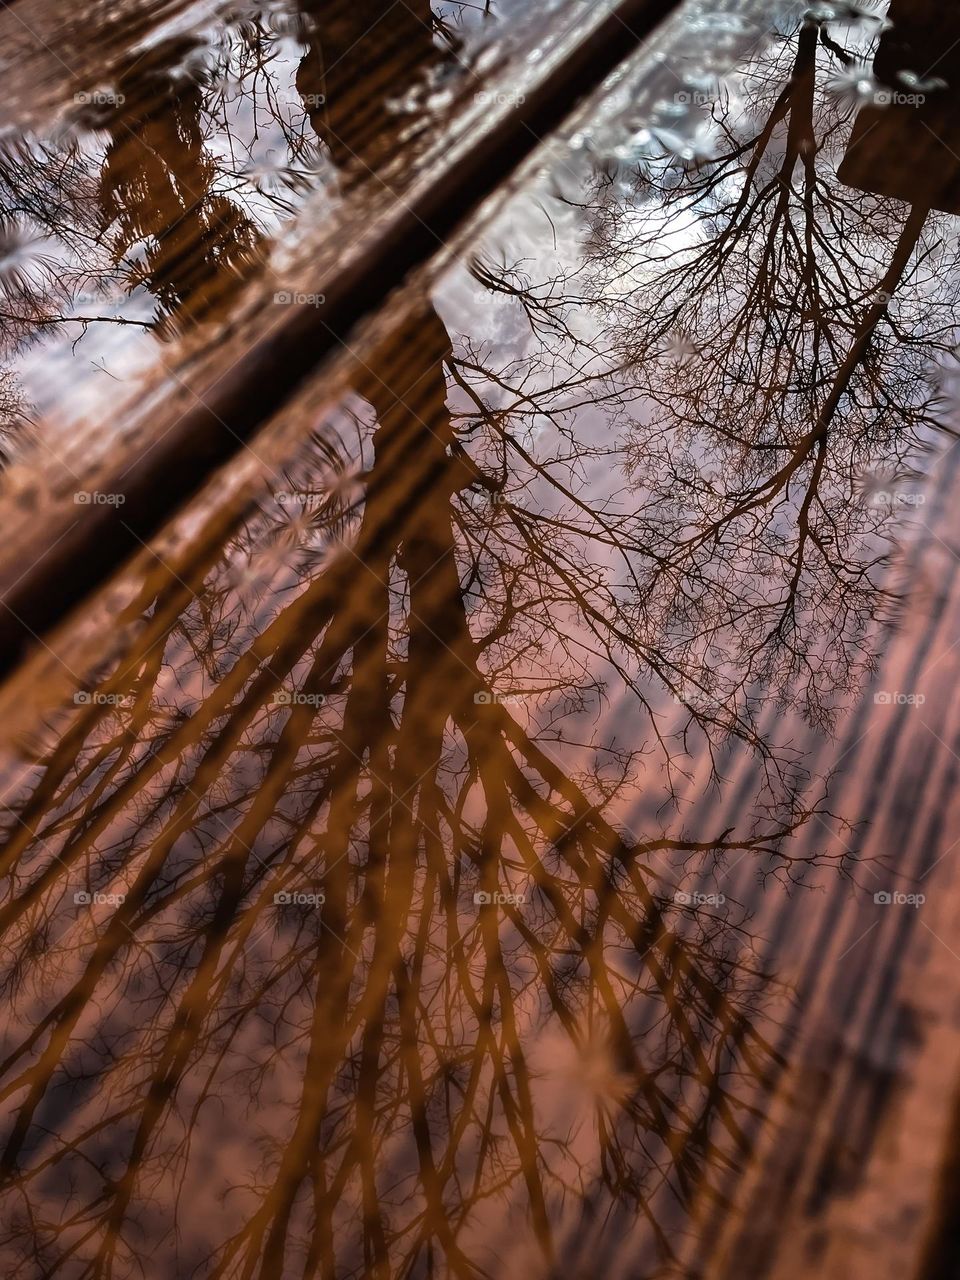 Spring showers rain storm weather puddle water reflection deck porch patio wood grains tree branch branches mirror reflection‘s mother nature Outdoors 